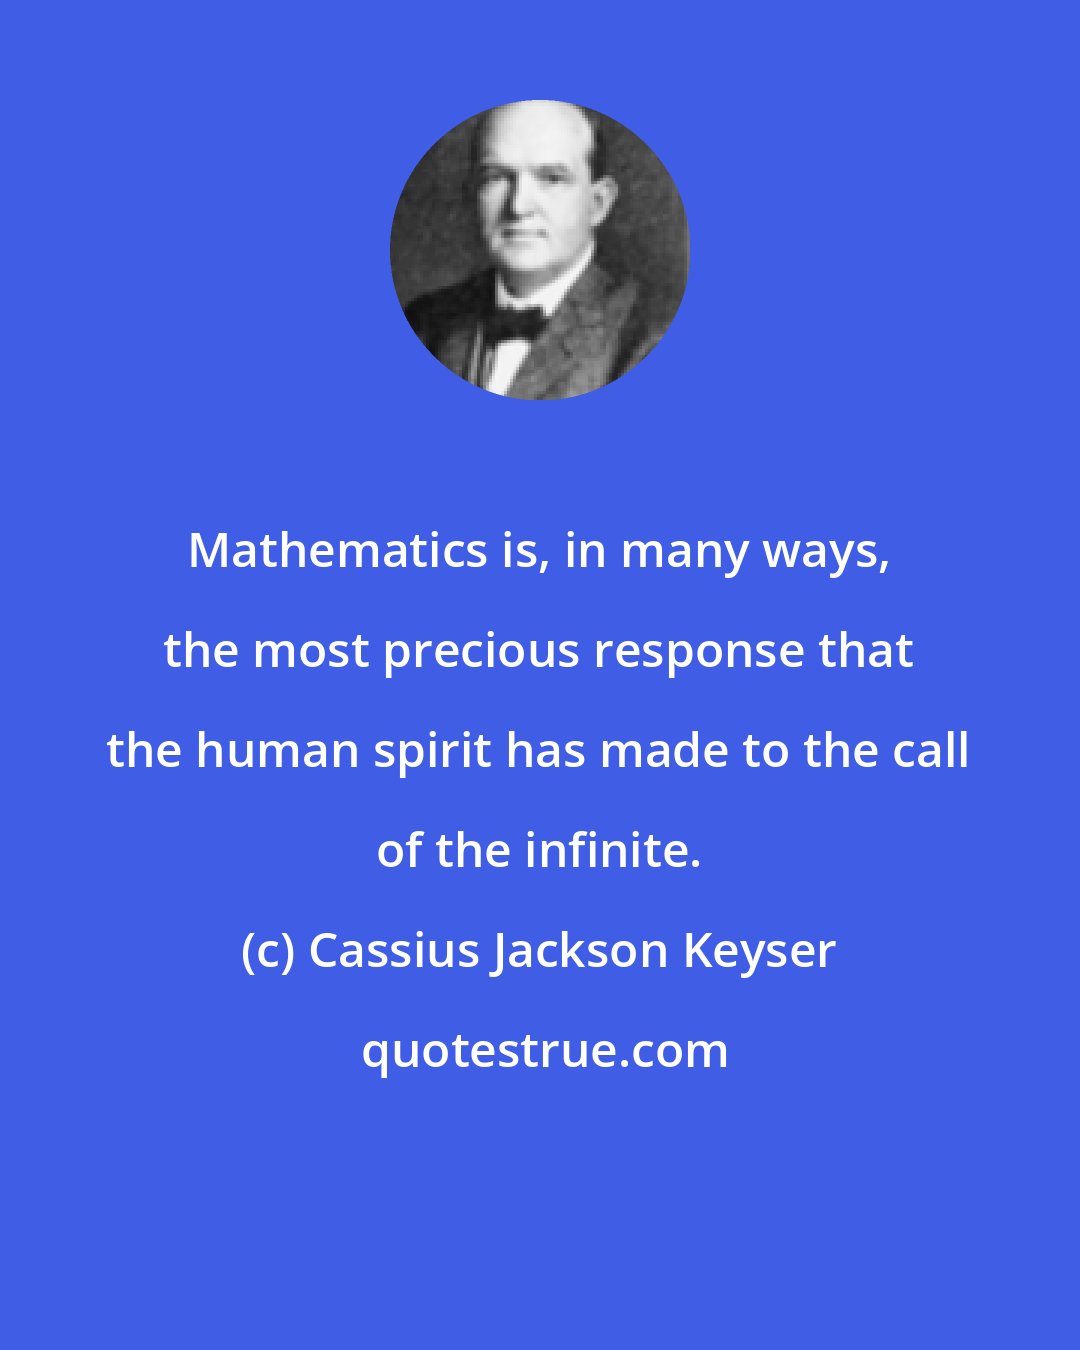 Cassius Jackson Keyser: Mathematics is, in many ways, the most precious response that the human spirit has made to the call of the infinite.